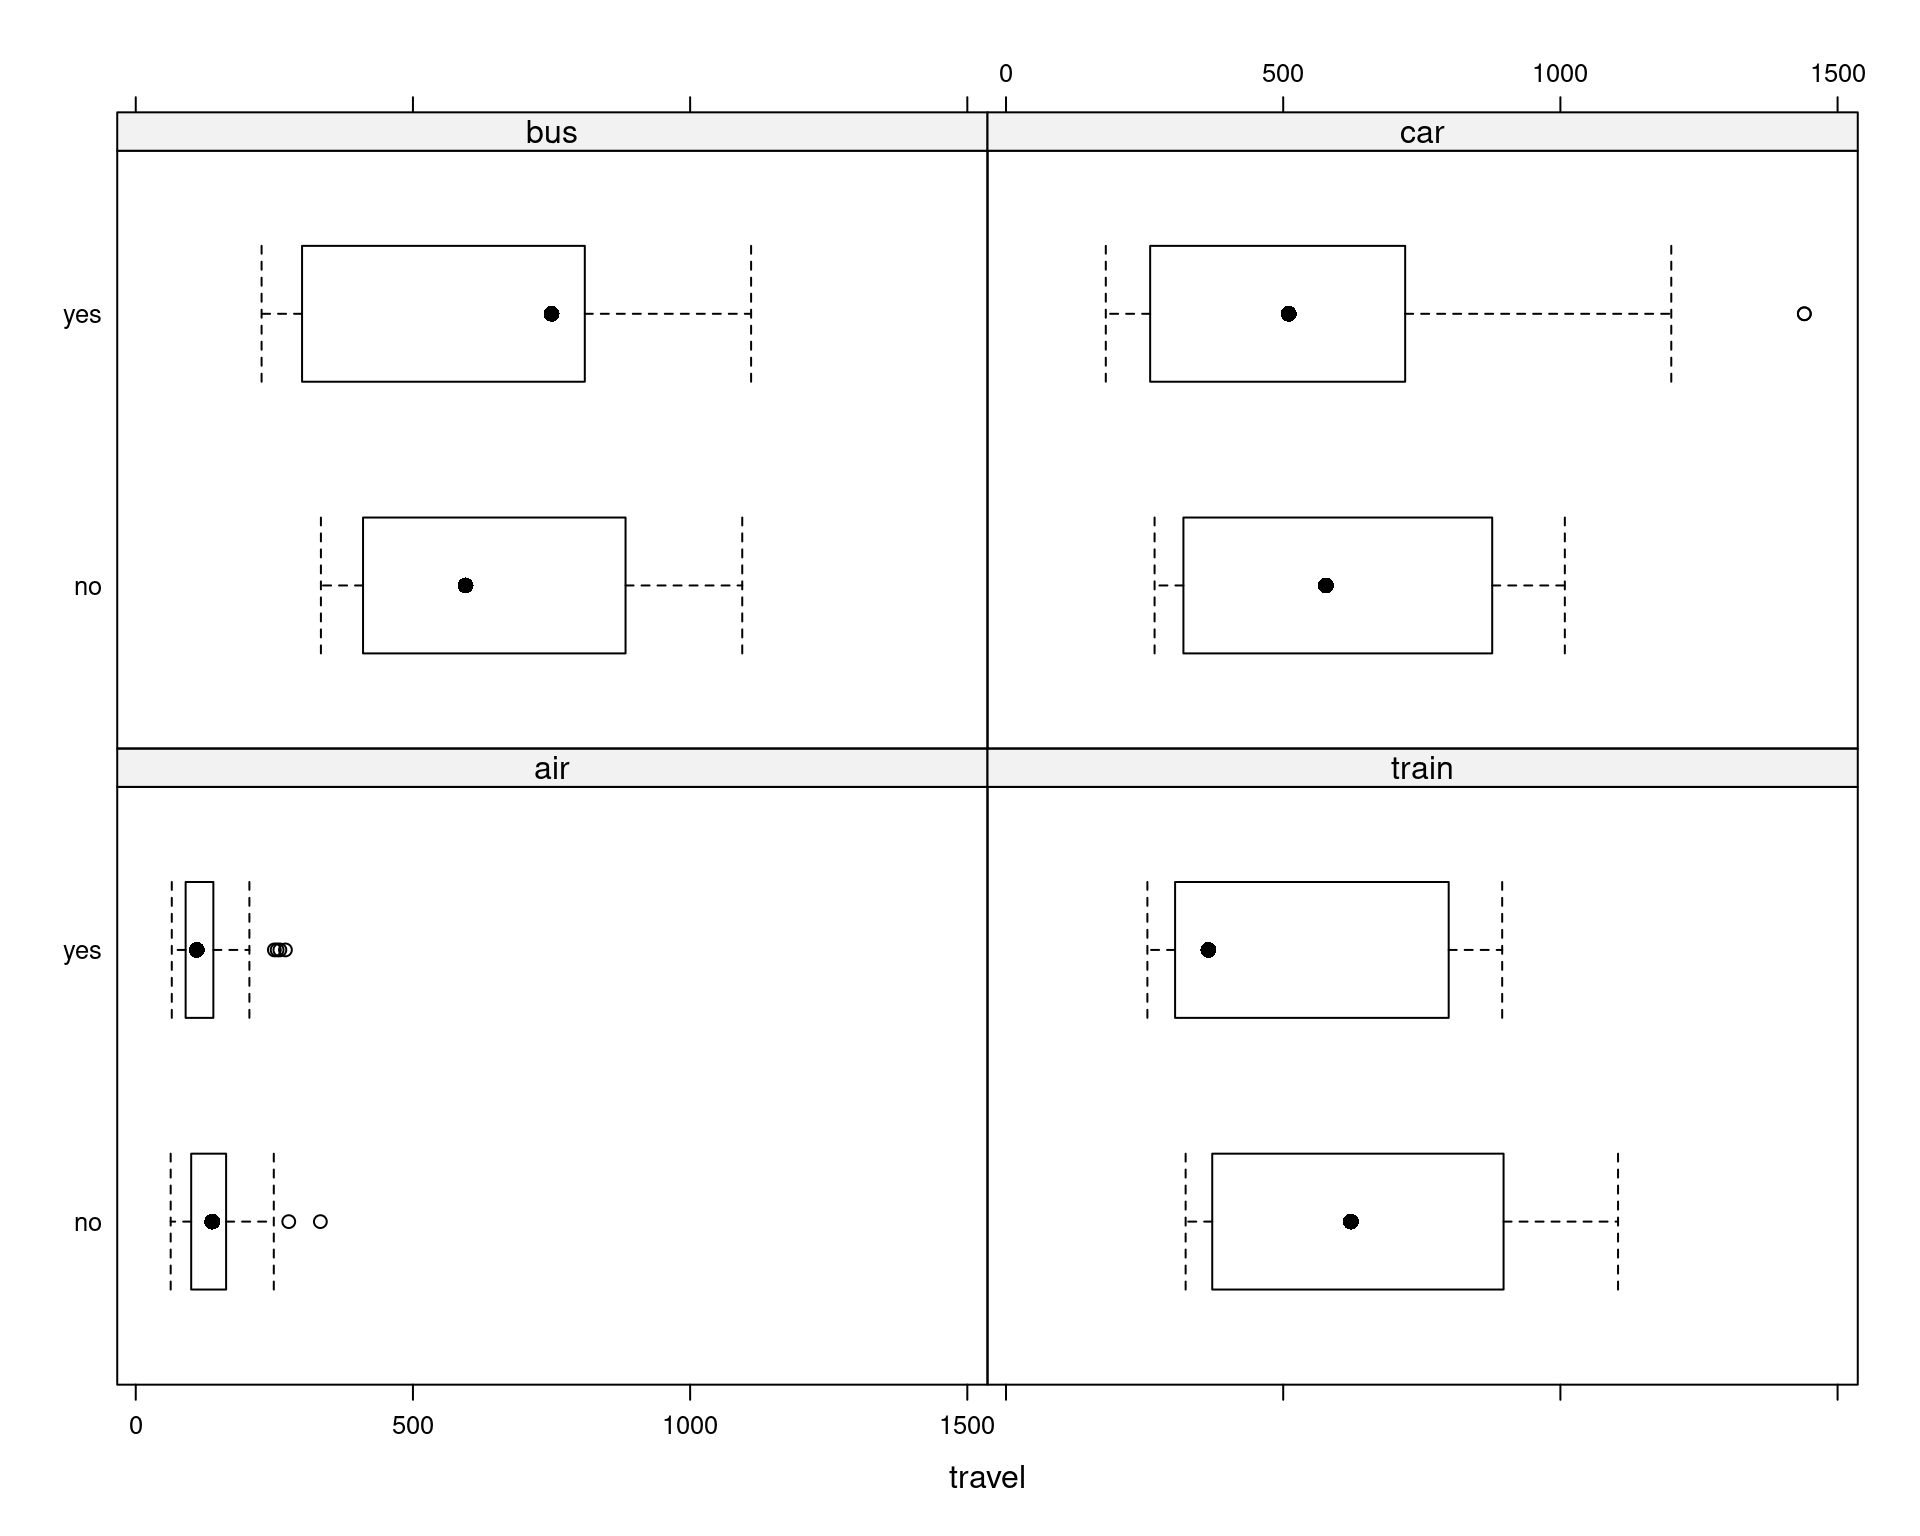 Influence Visualized in Boxplots